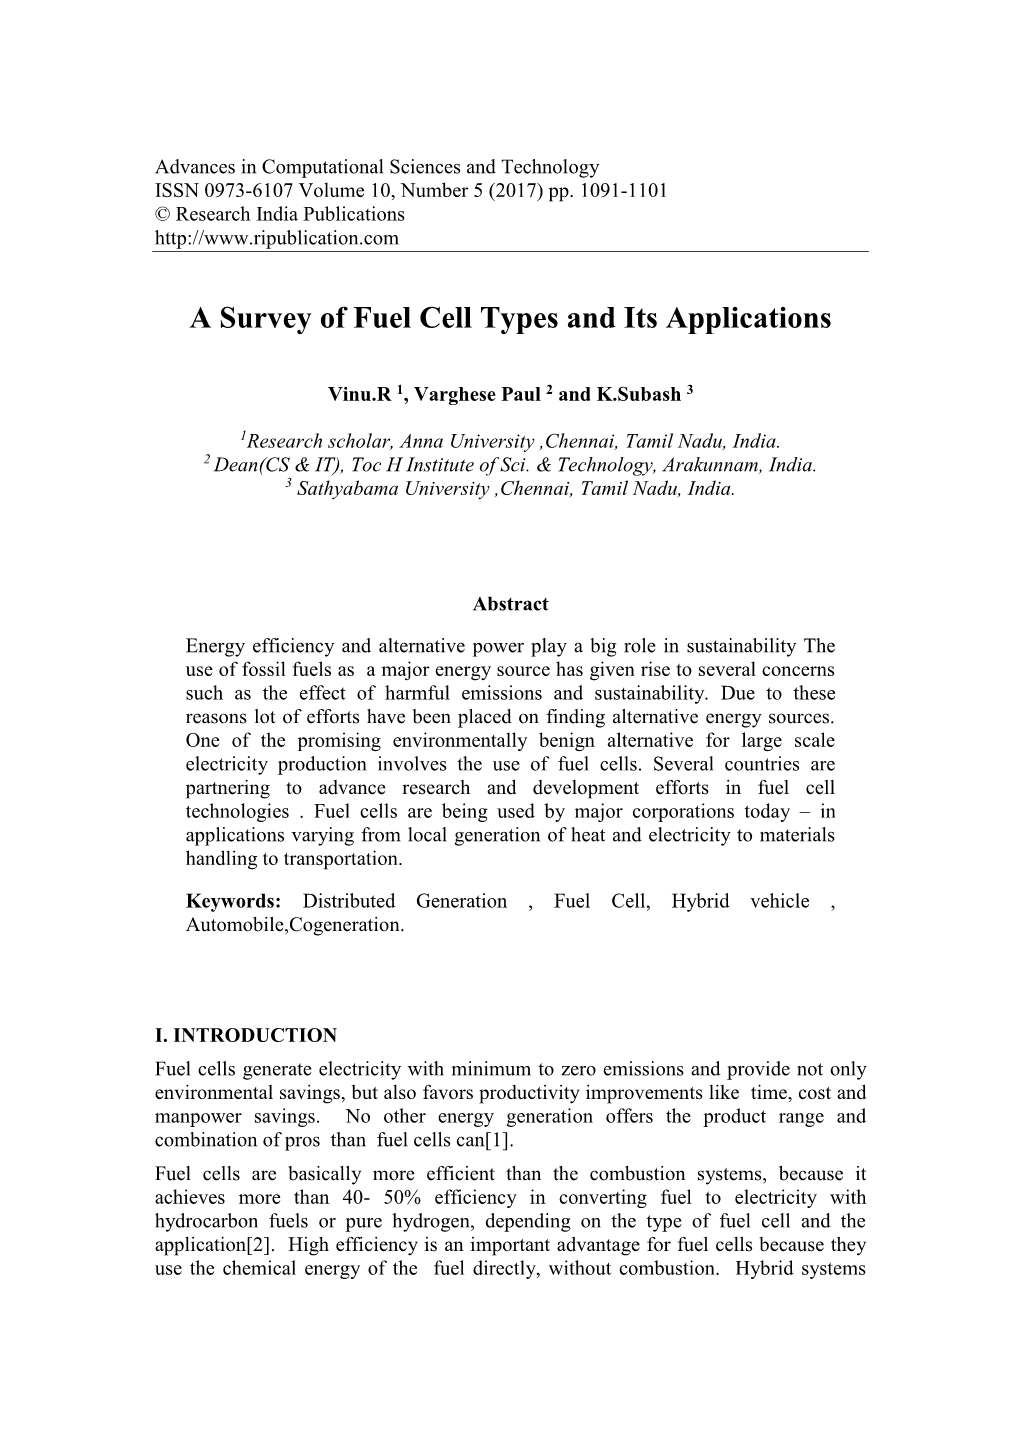 A Survey of Fuel Cell Types and Its Applications